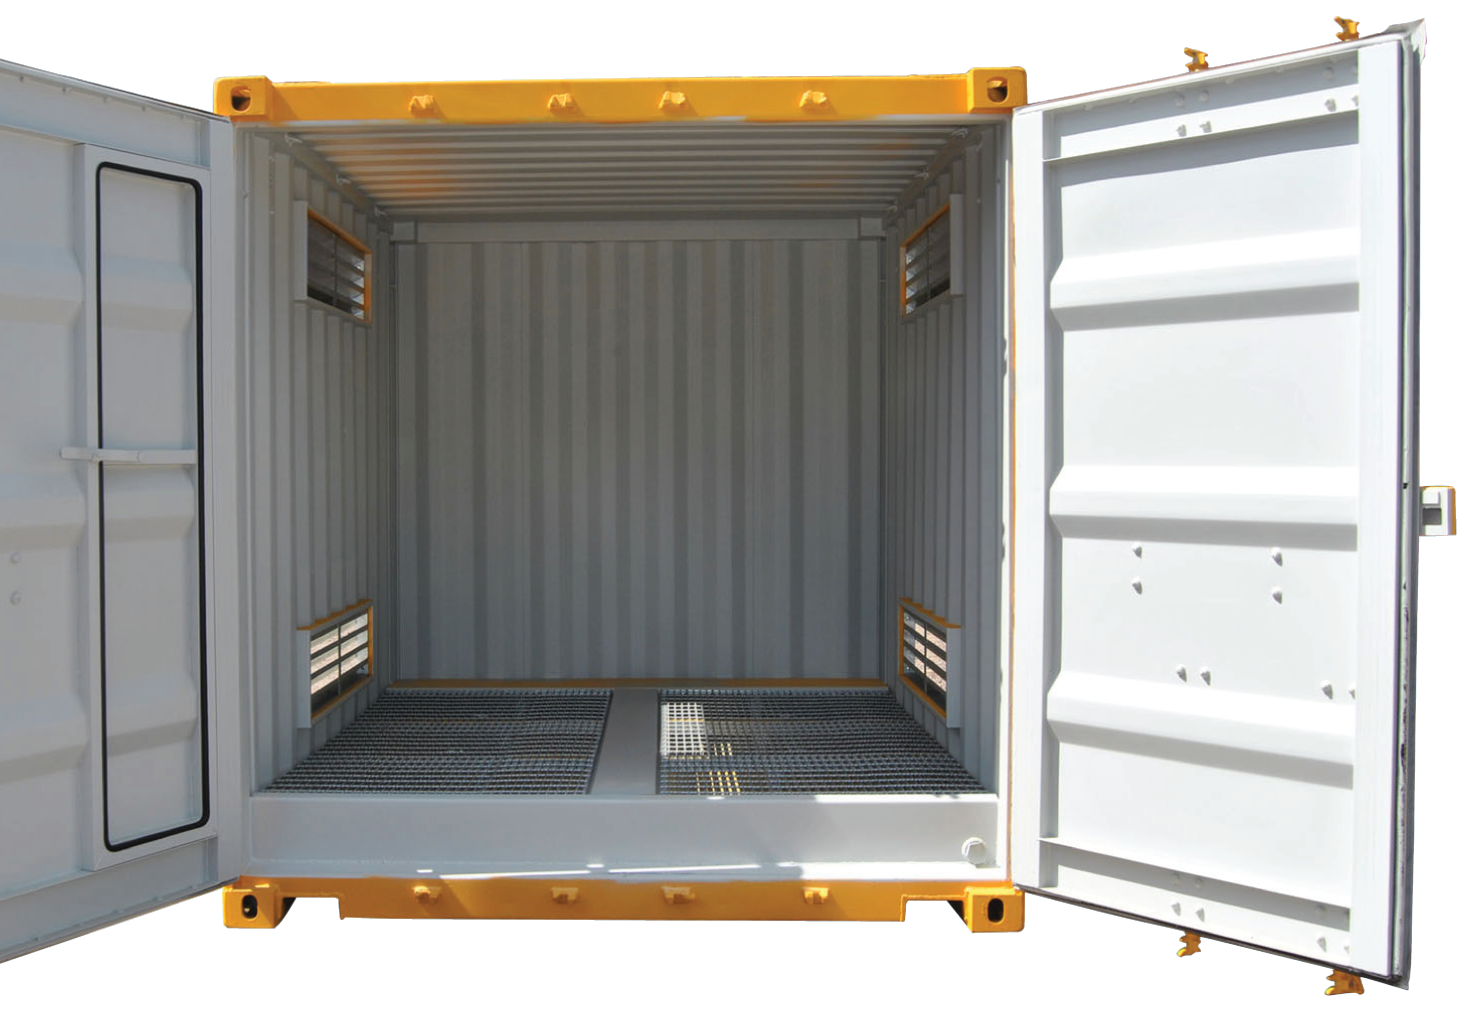 Storage in Containers